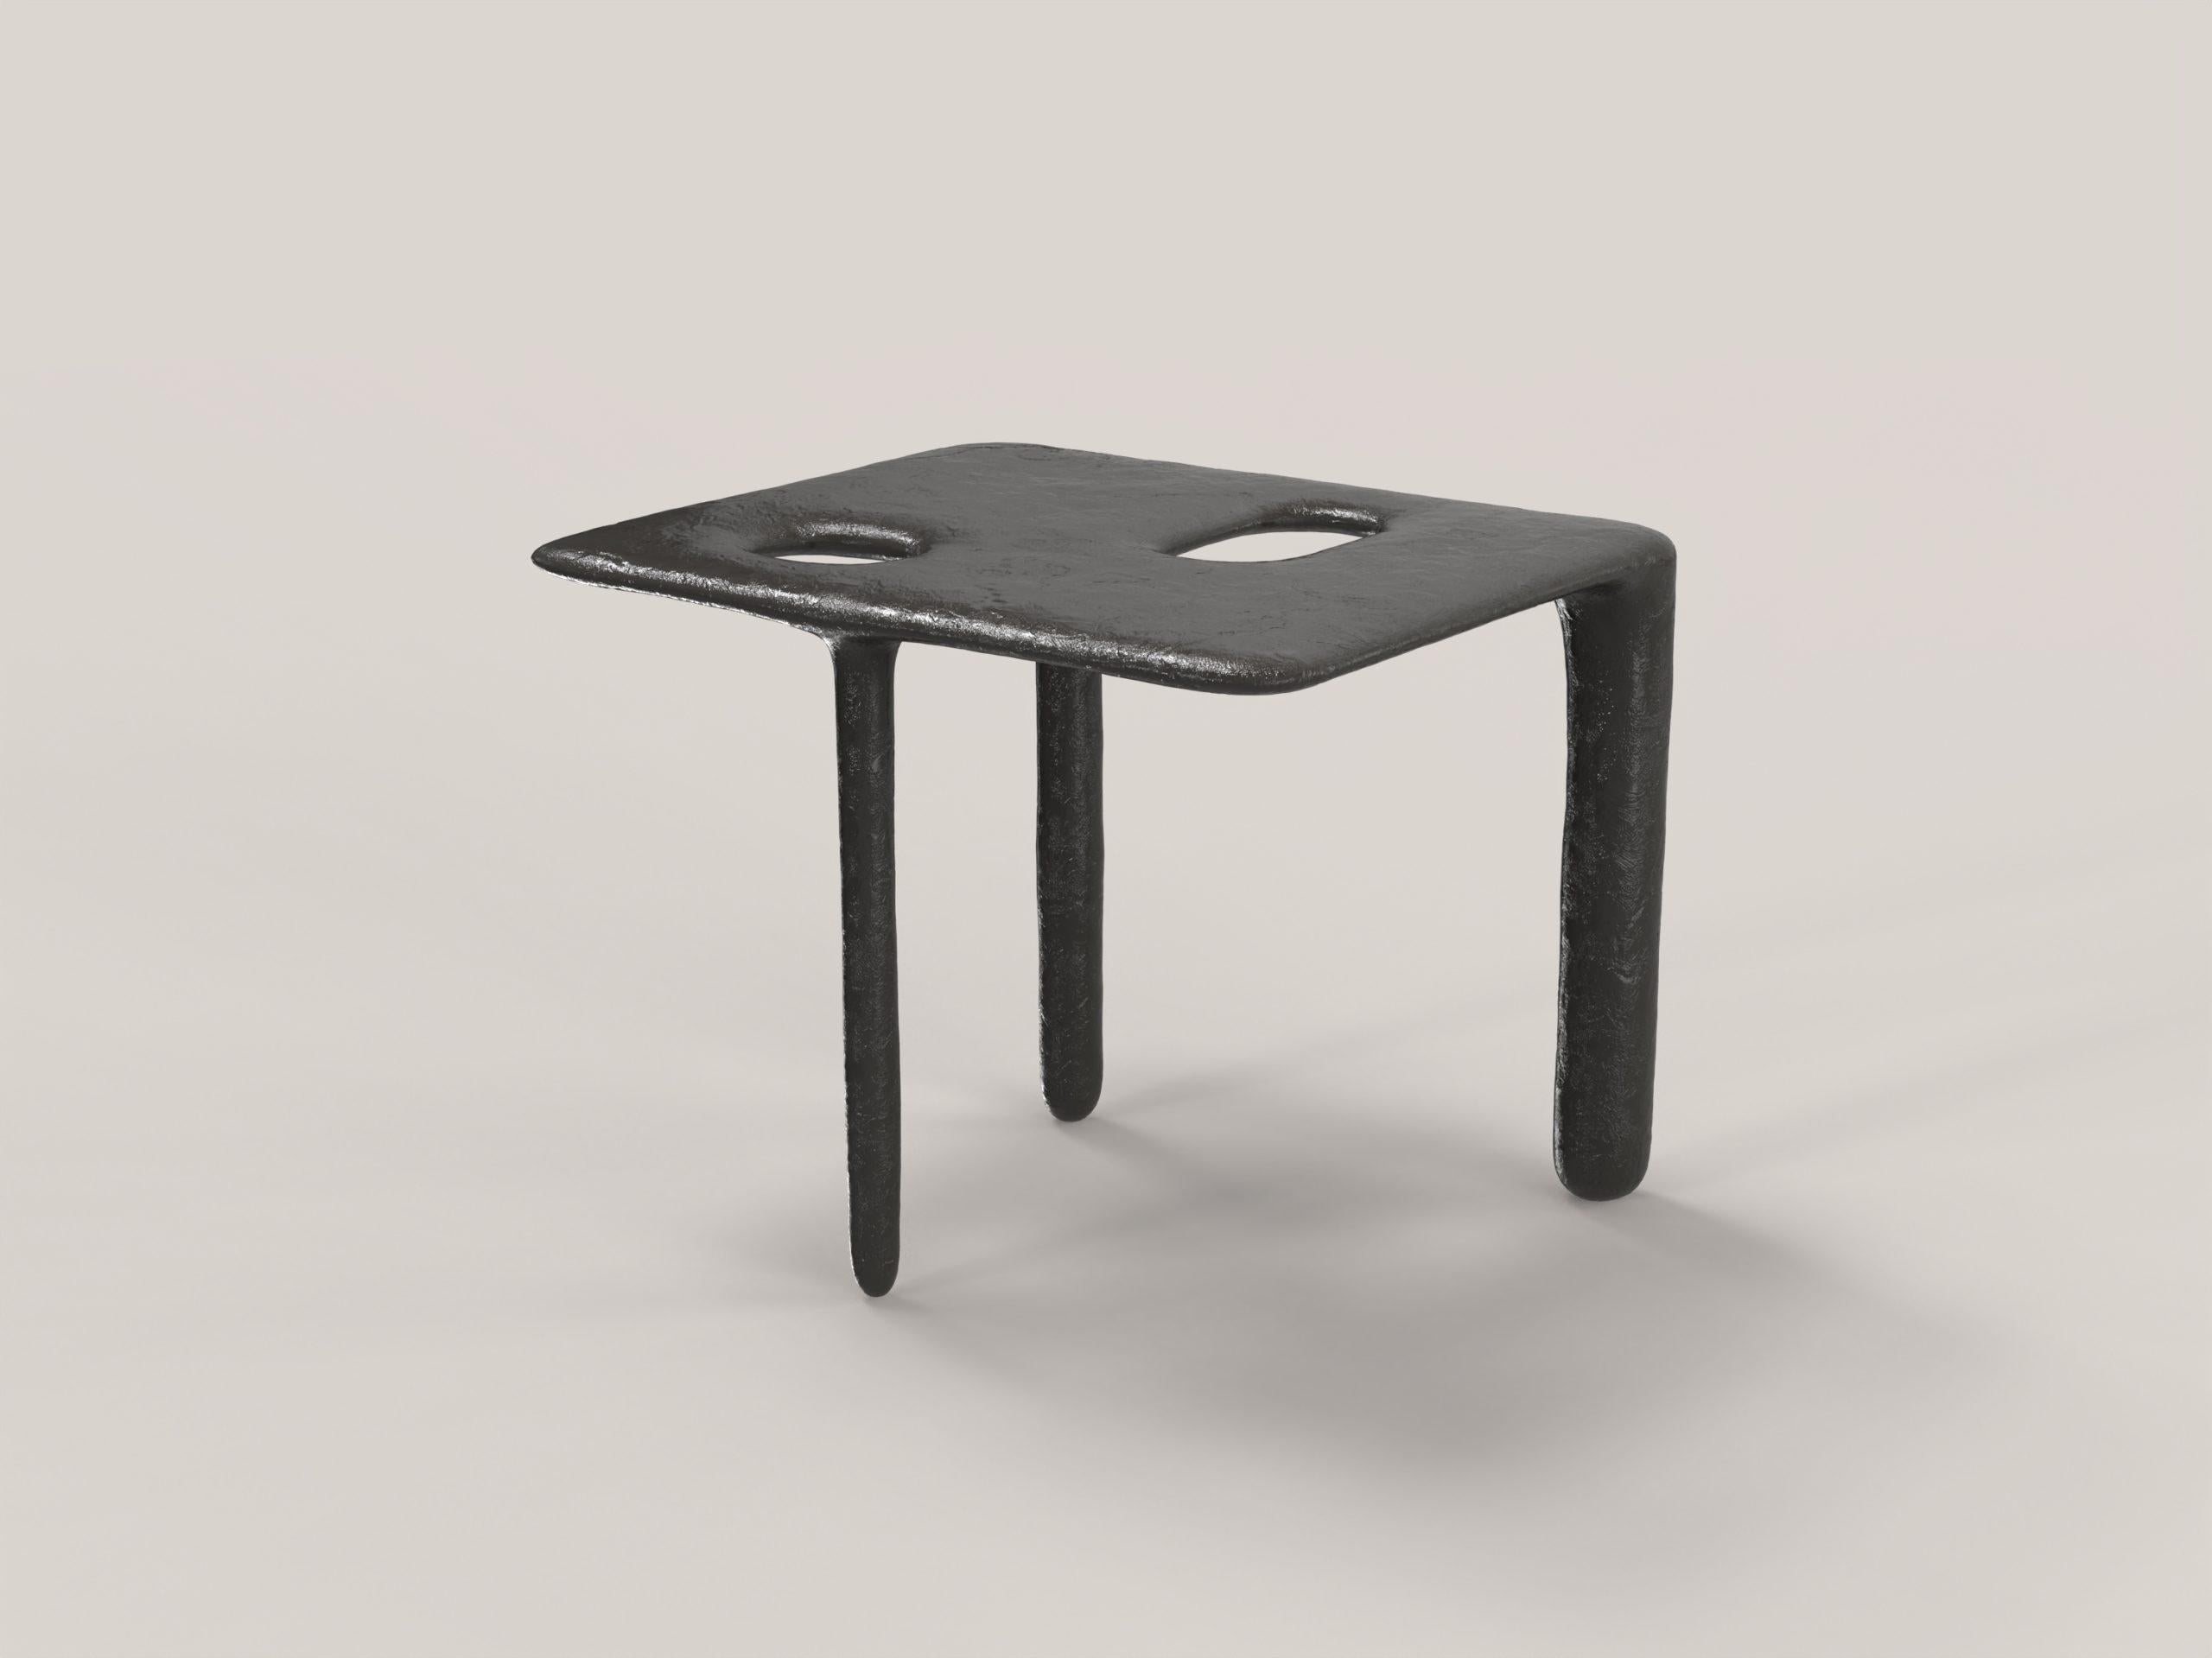 Set of 2 Oasi V1 and V2 Low Tables by Edizione Limitata For Sale 4